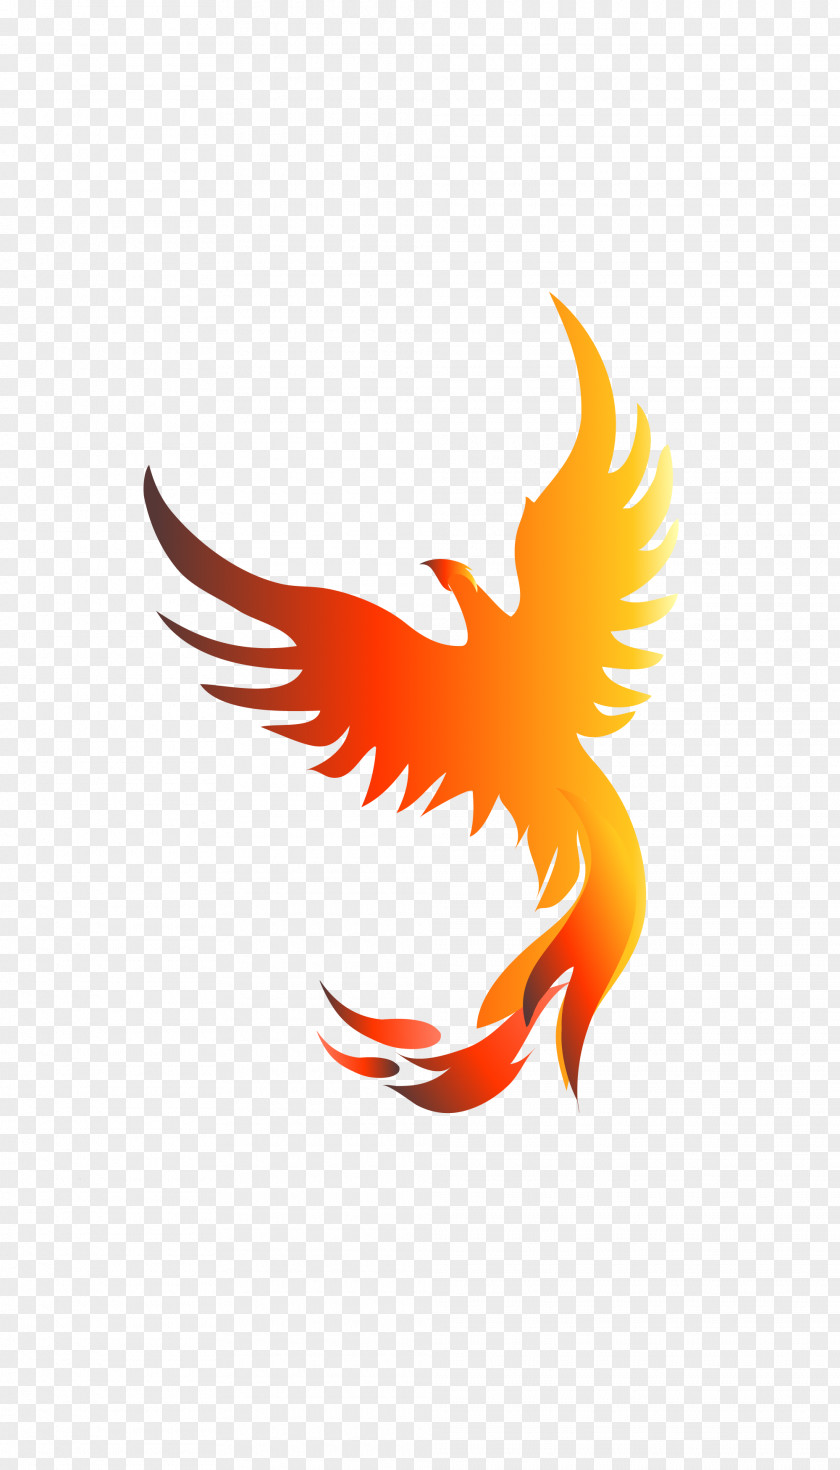 Phoenix Royalty-free Stock Photography Clip Art PNG